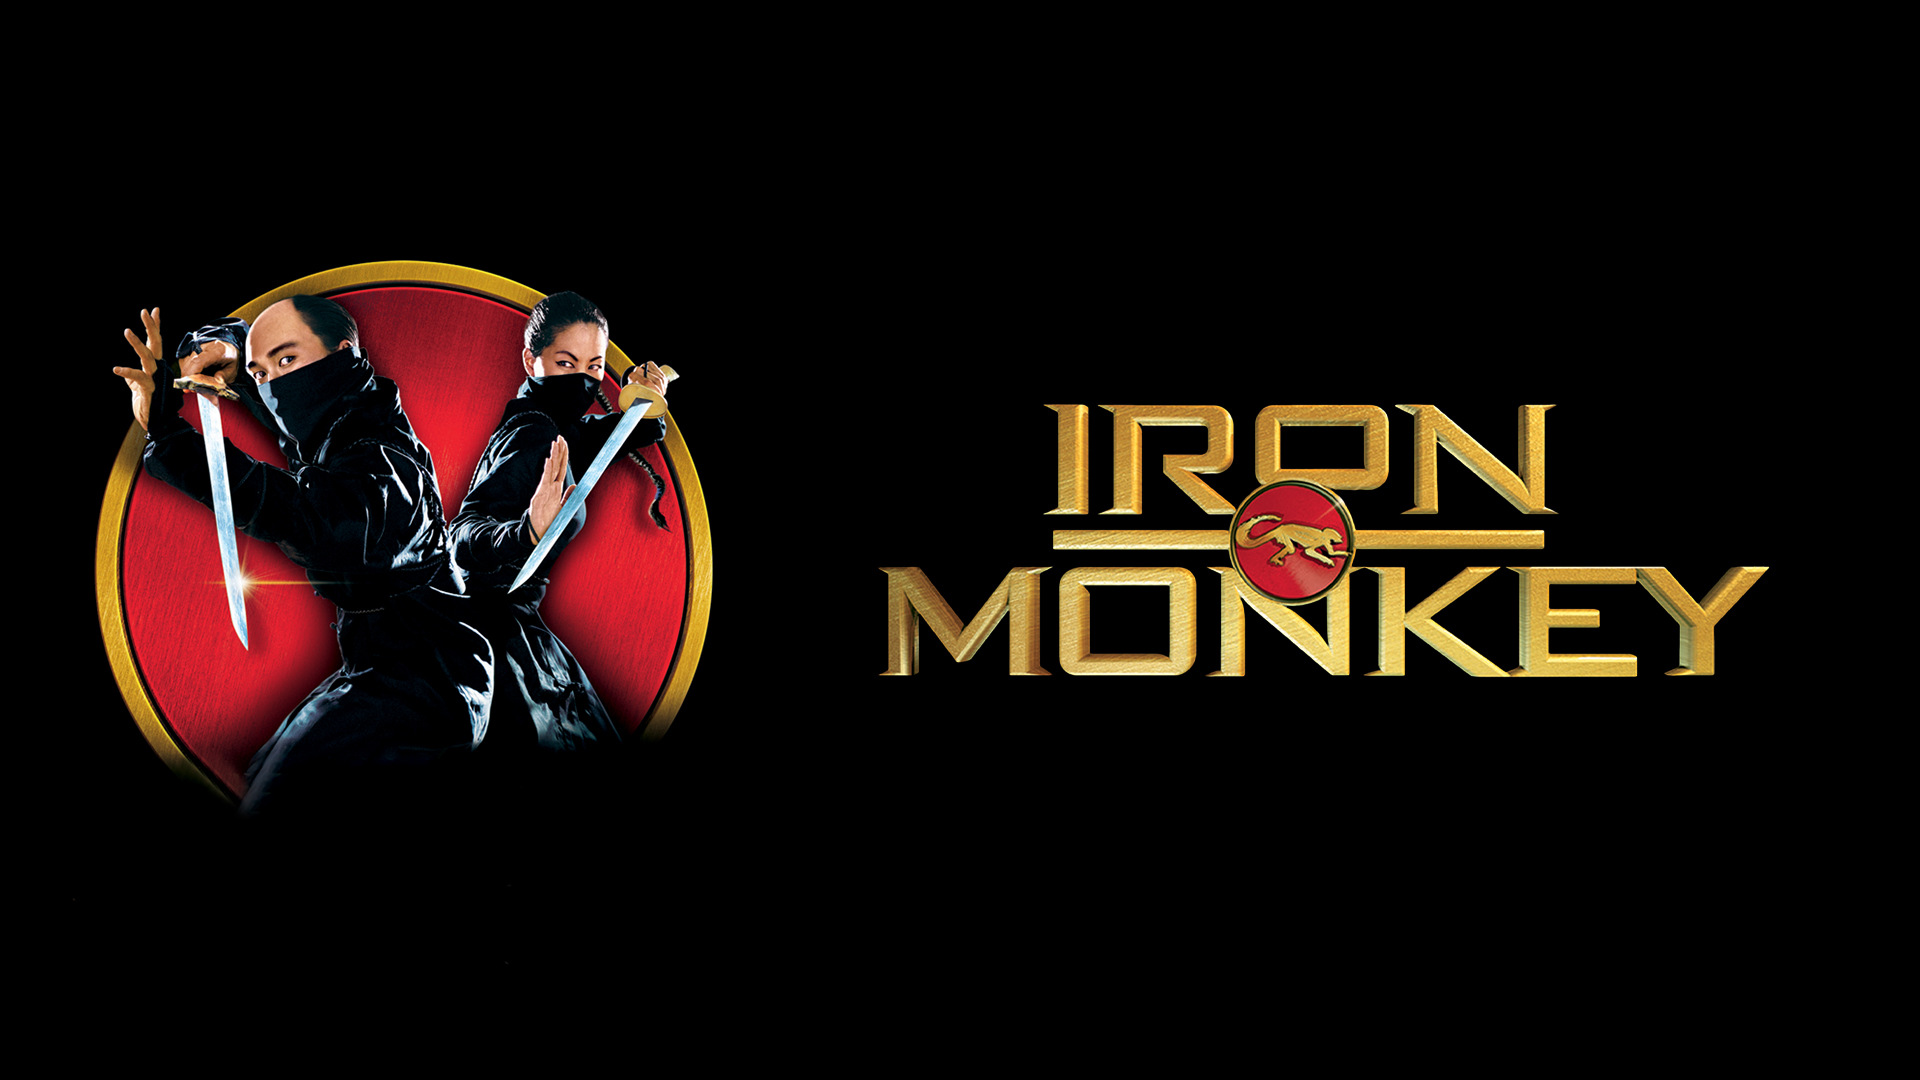 38-facts-about-the-movie-iron-monkey